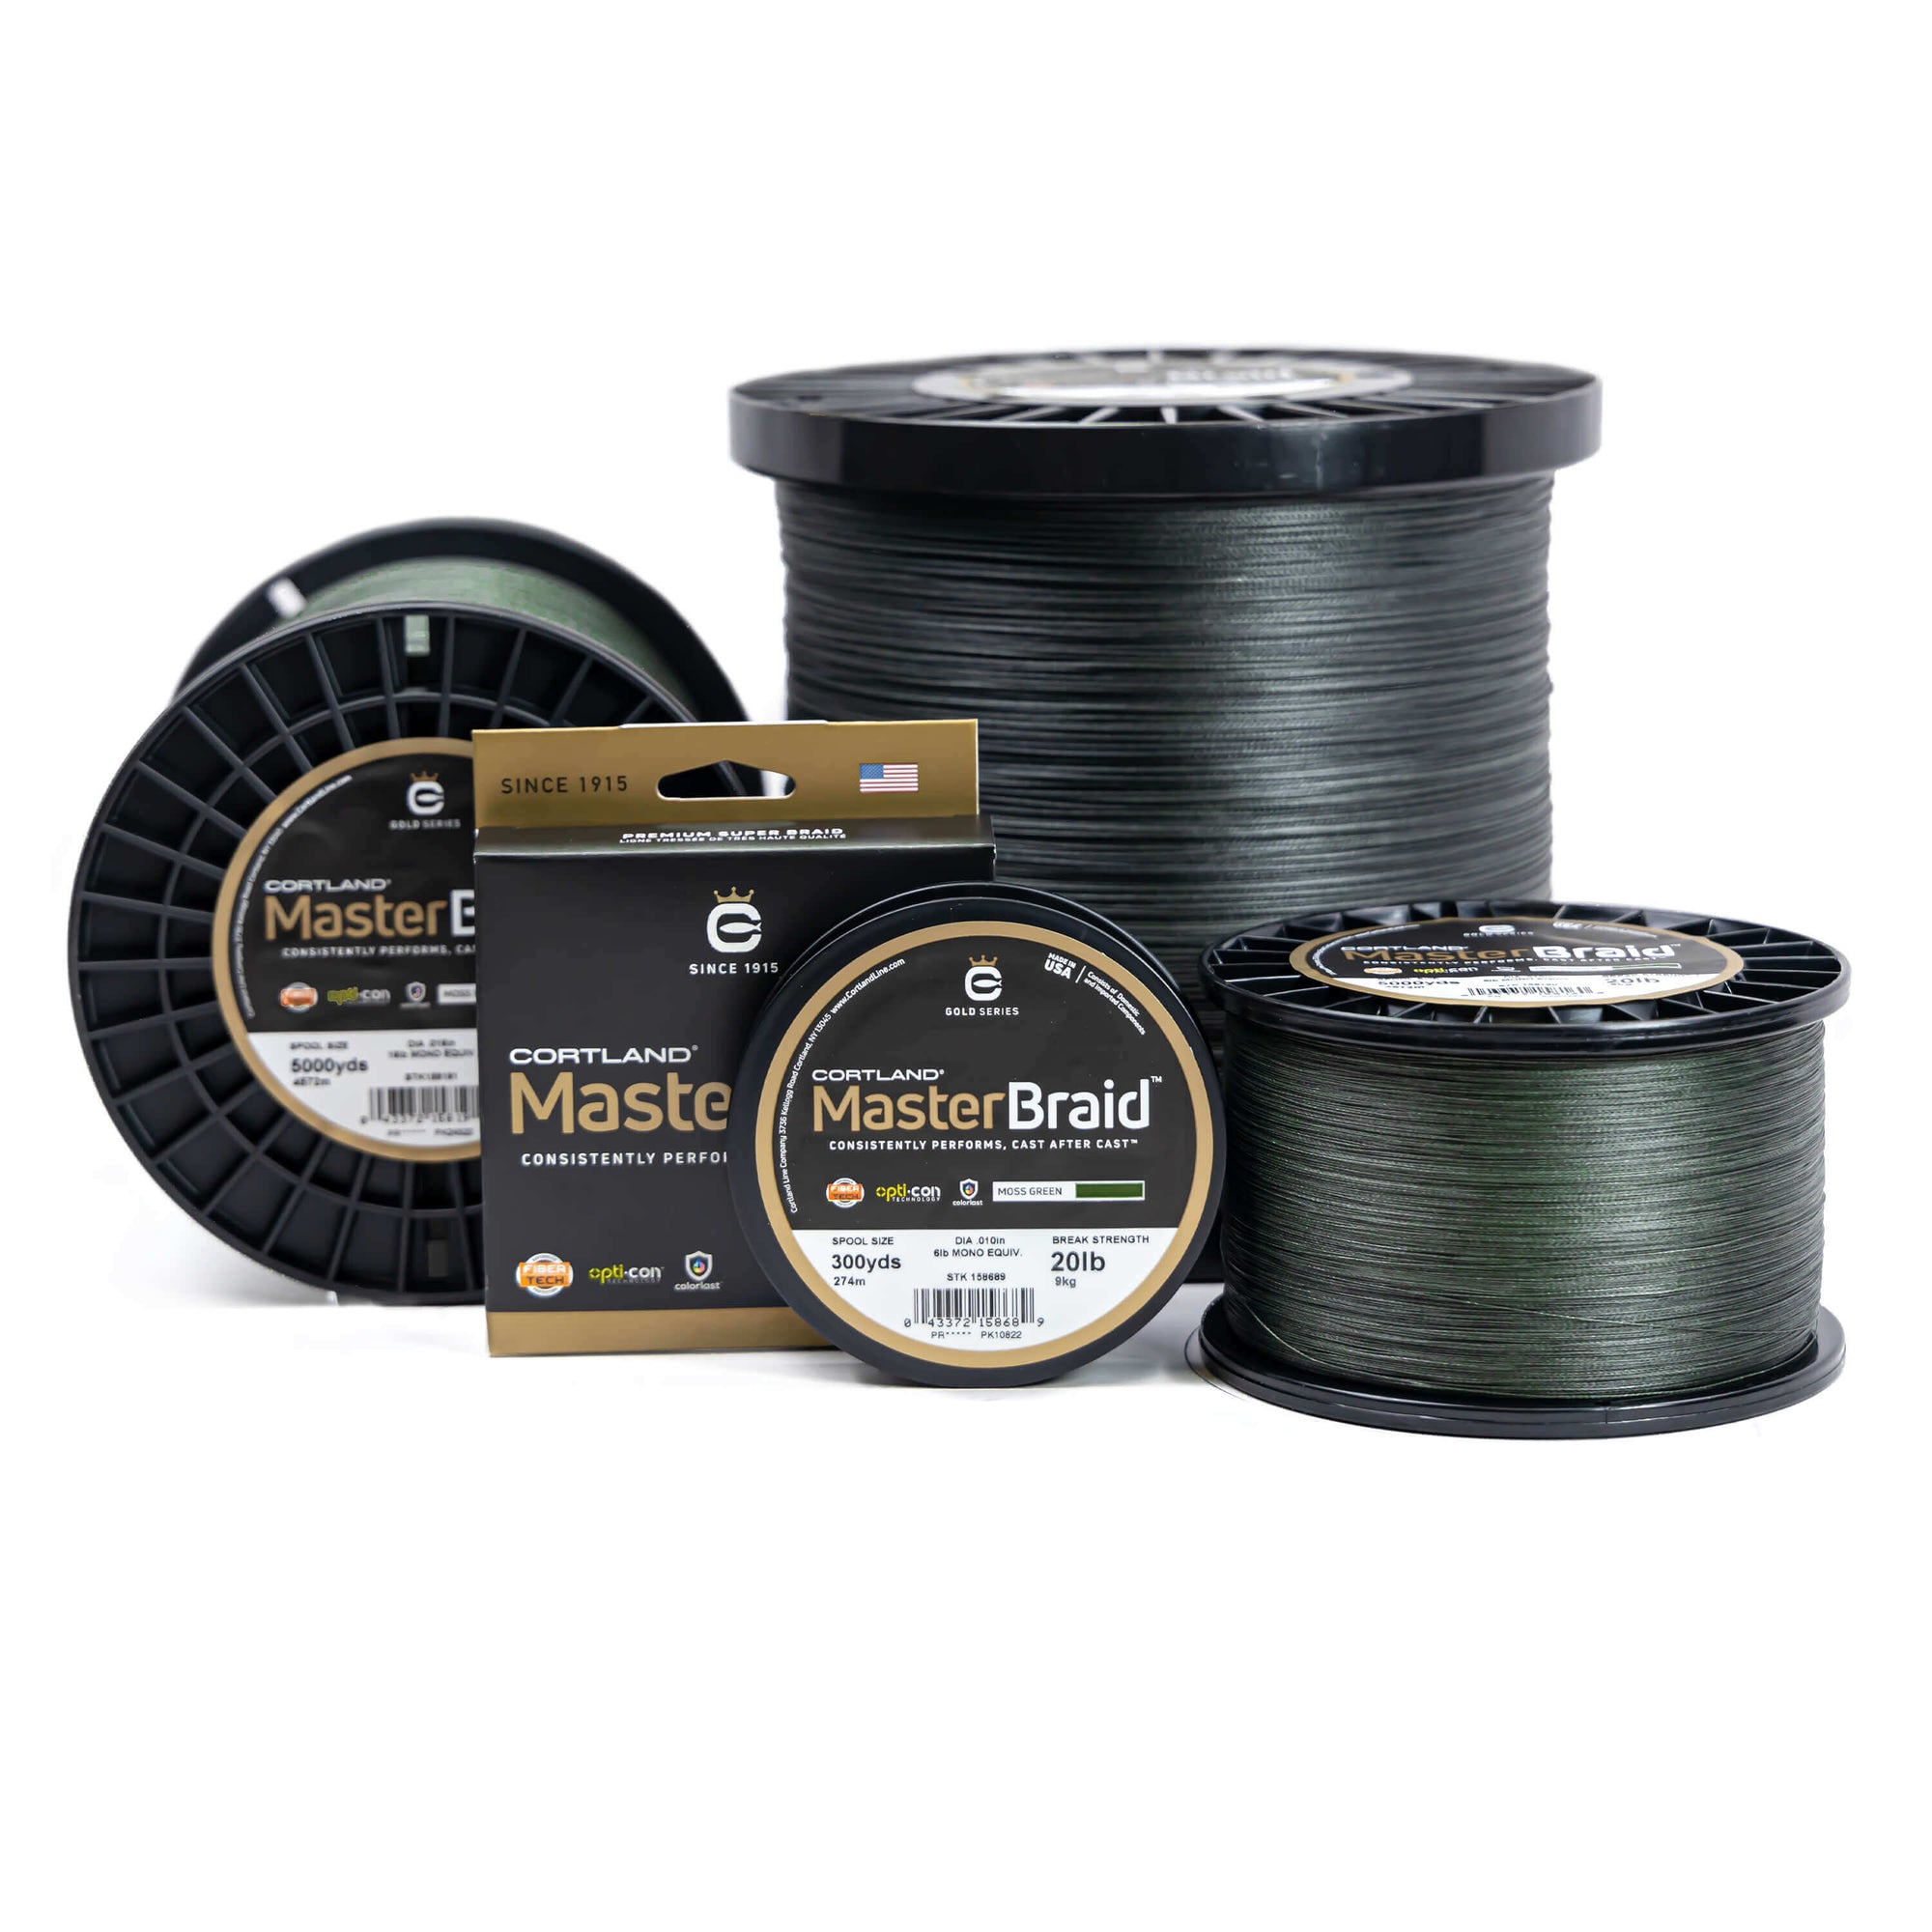 The Best Braided Fishing Line from Germany